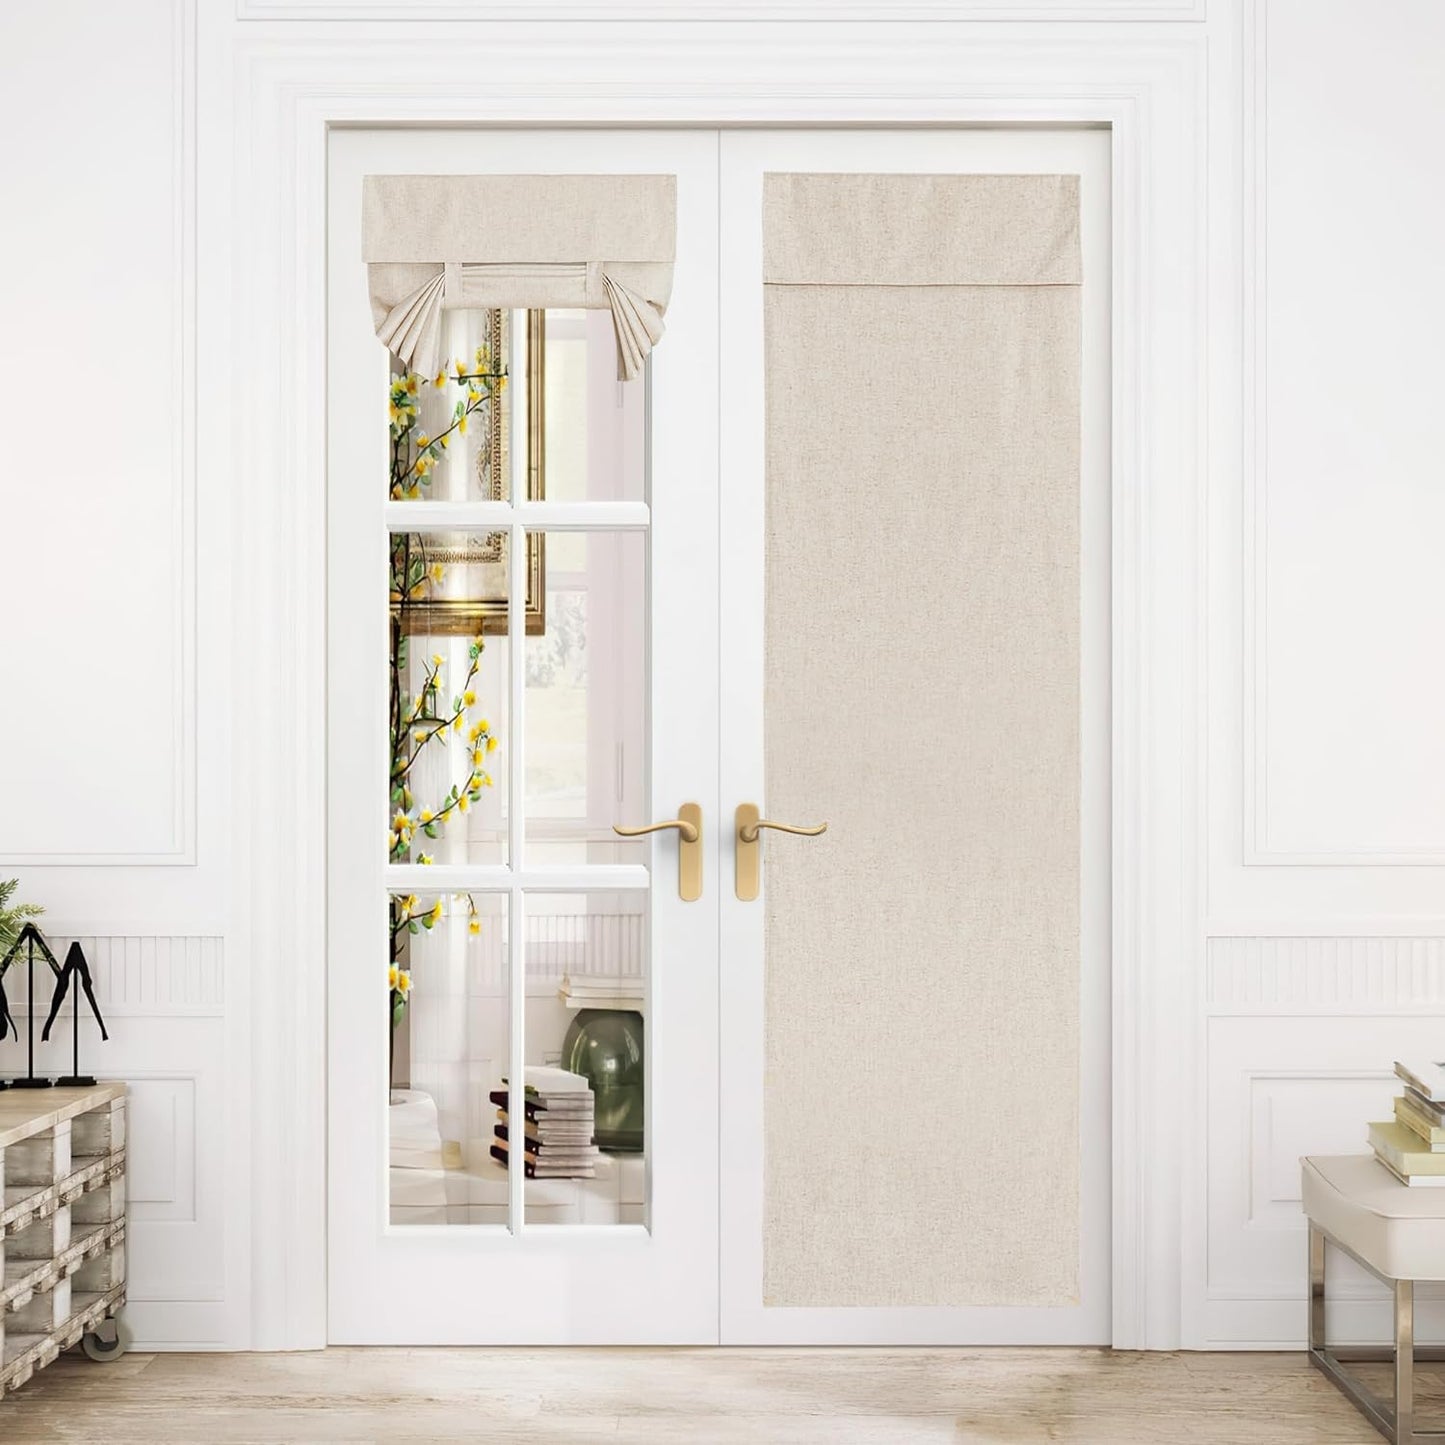 NICETOWN Linen Door Curtain for Door Window, Farmhouse French Door Curtain Shade for Kitchen Bathroom Energy Saving 100% Blackout Tie up Shade for Patio Sliding Glass, 1 Panel, Natural, 26" W X 72" L  NICETOWN Beige W26 X L80 